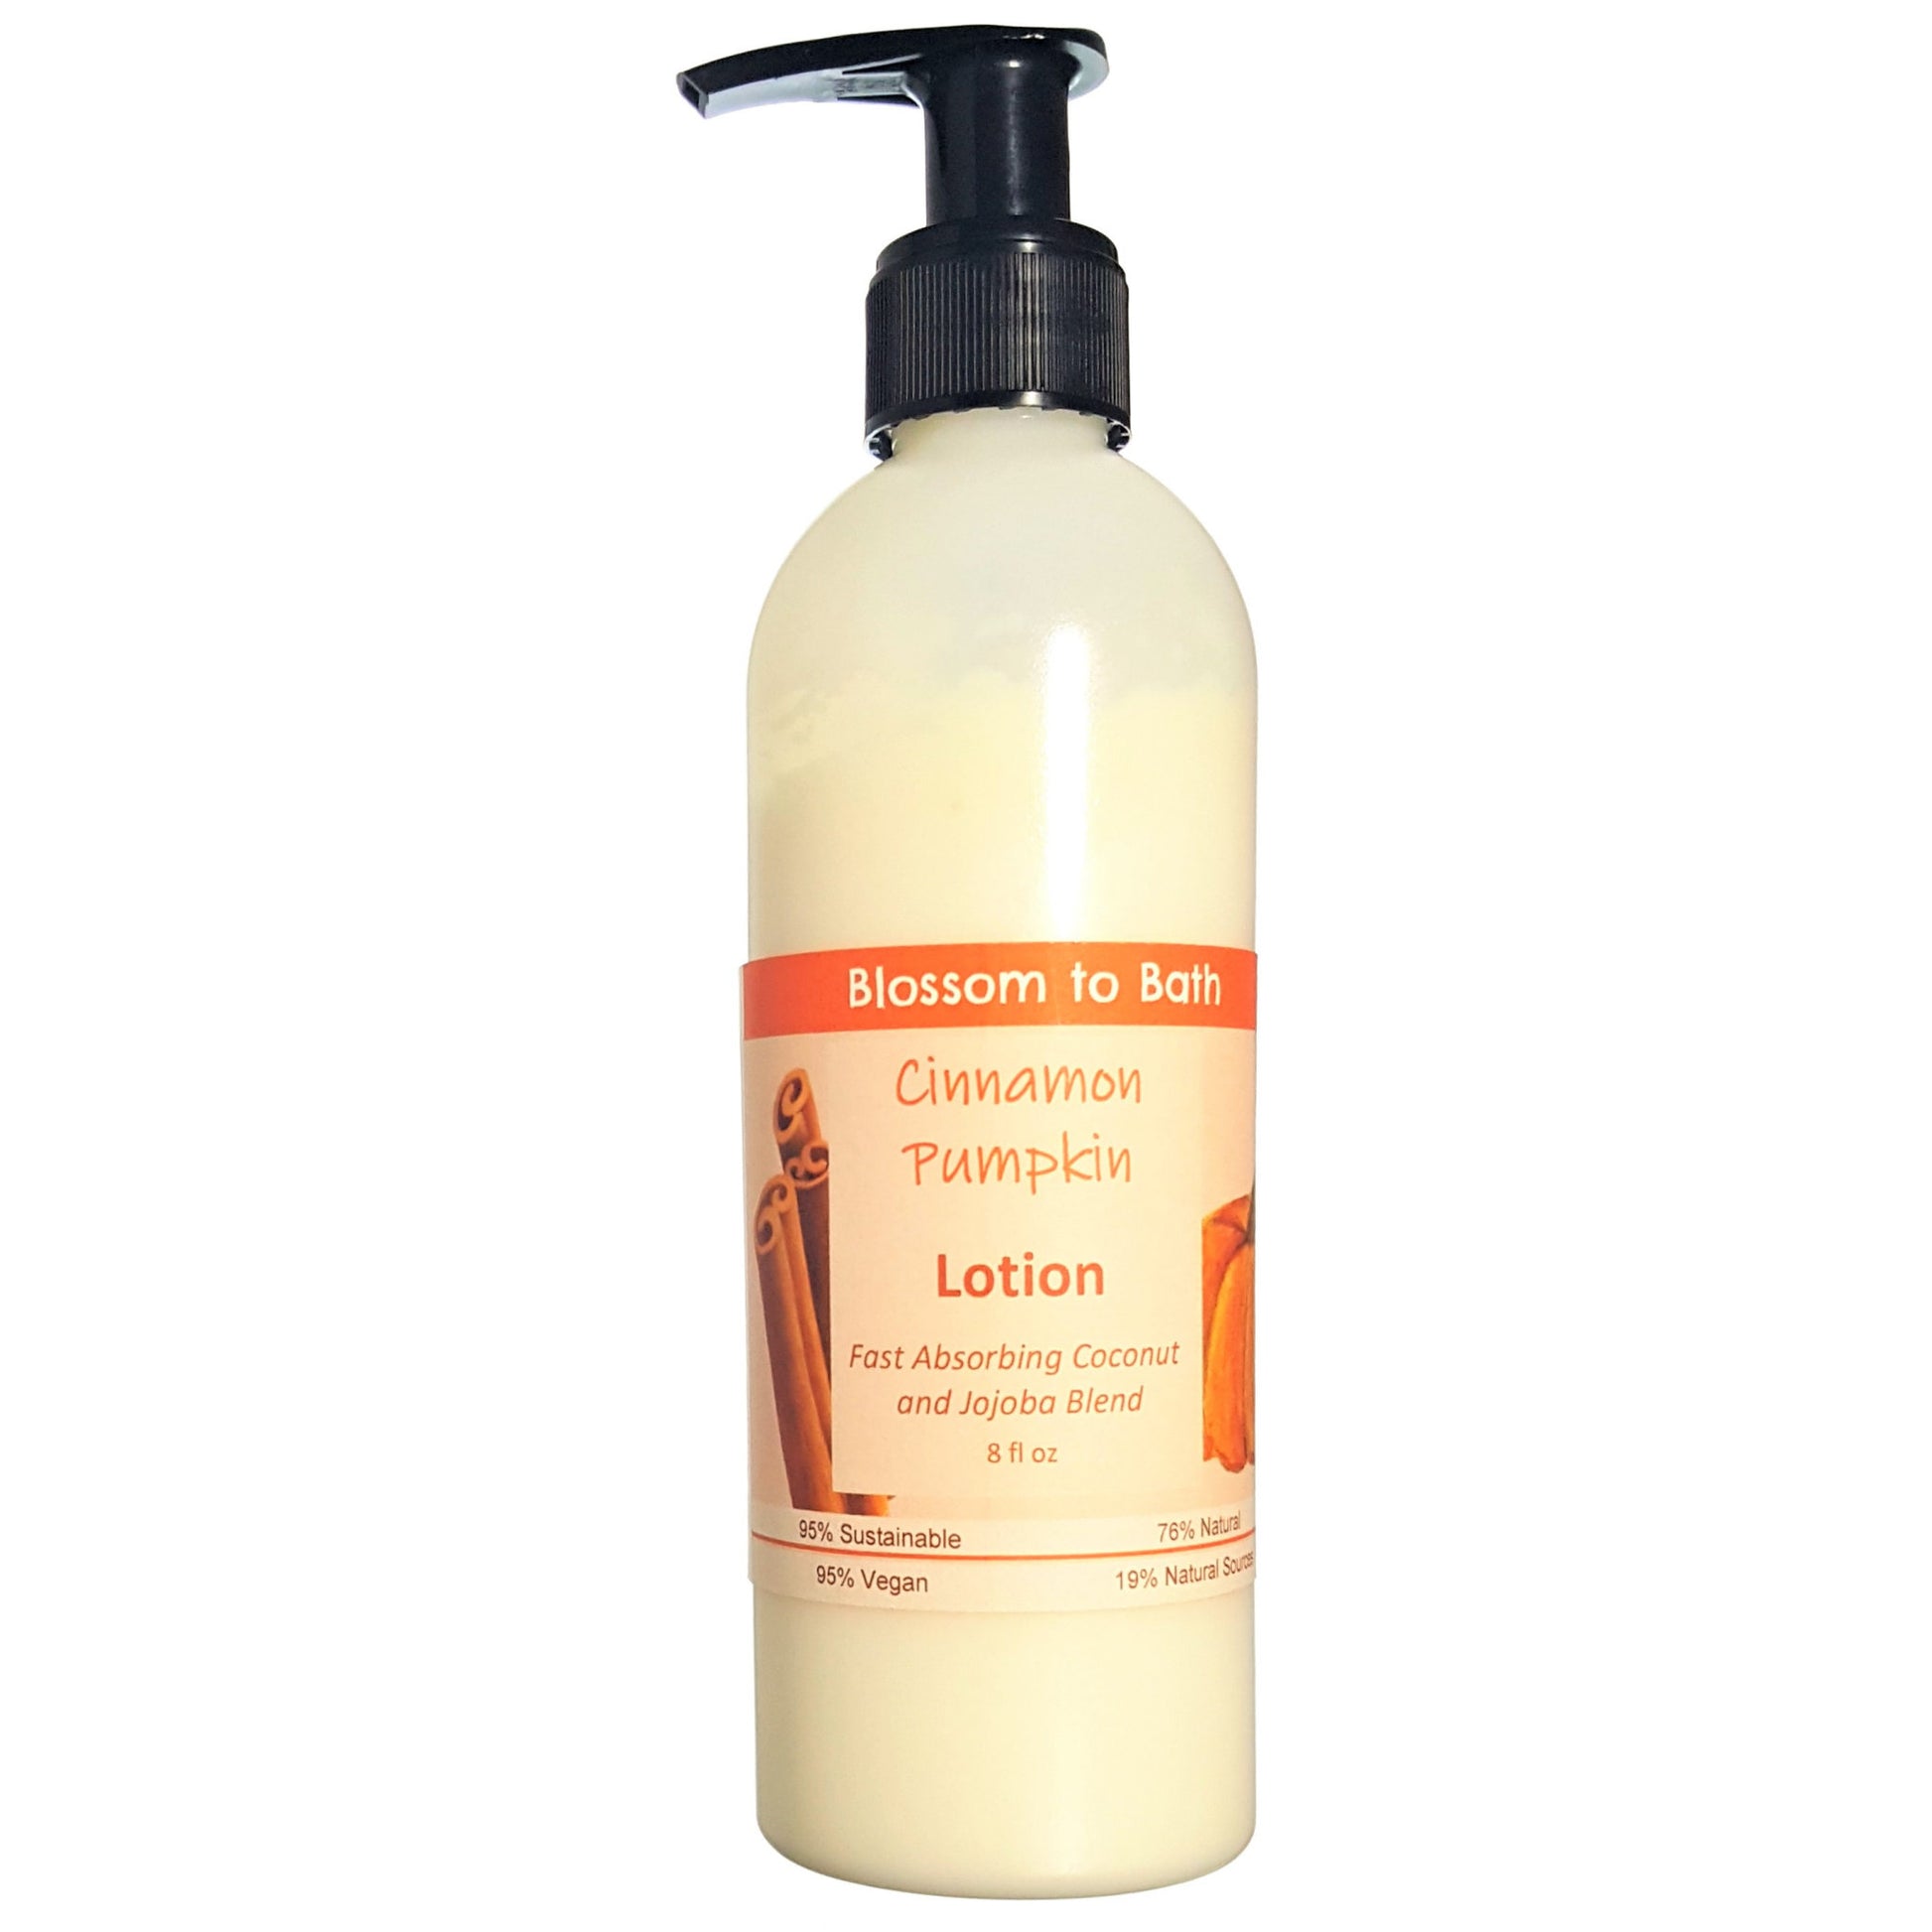 Buy Blossom to Bath Cinnamon Pumpkin Lotion from Flowersong Soap Studio.  Daily moisture  that soaks in quickly made with organic oils and butters that soften and smooth the skin  An engaging, cheerful scent filled with sweet vanilla and warm spice.